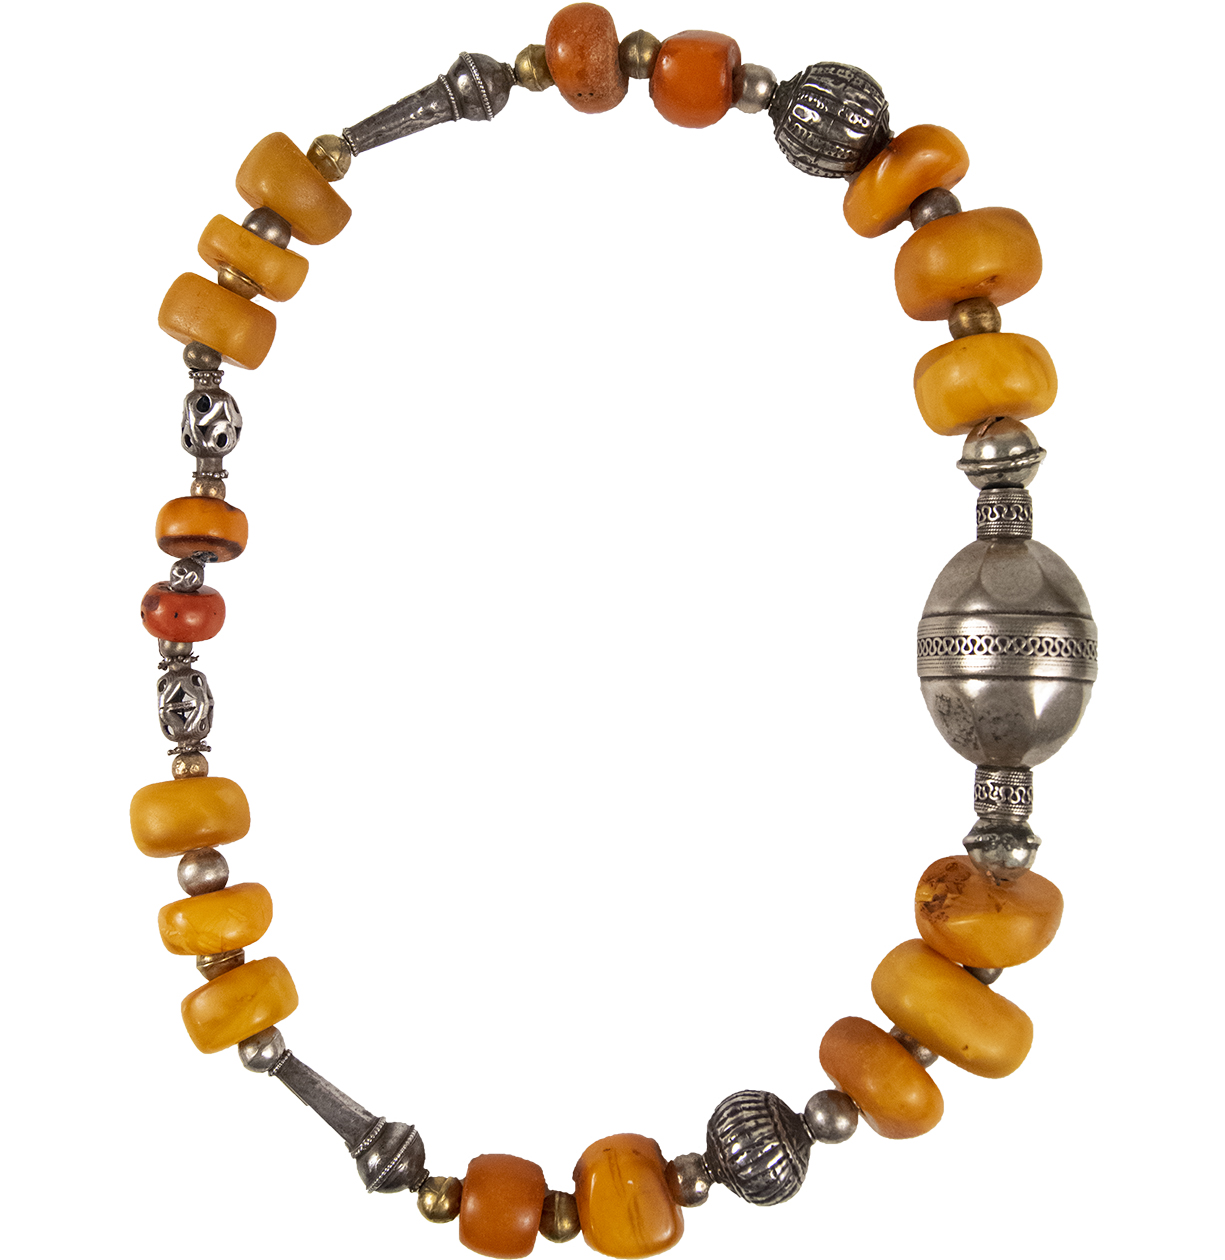 Details about   Berber amber necklace,strand Amber Moroccan vintage Handcrafted Jewelry.807 